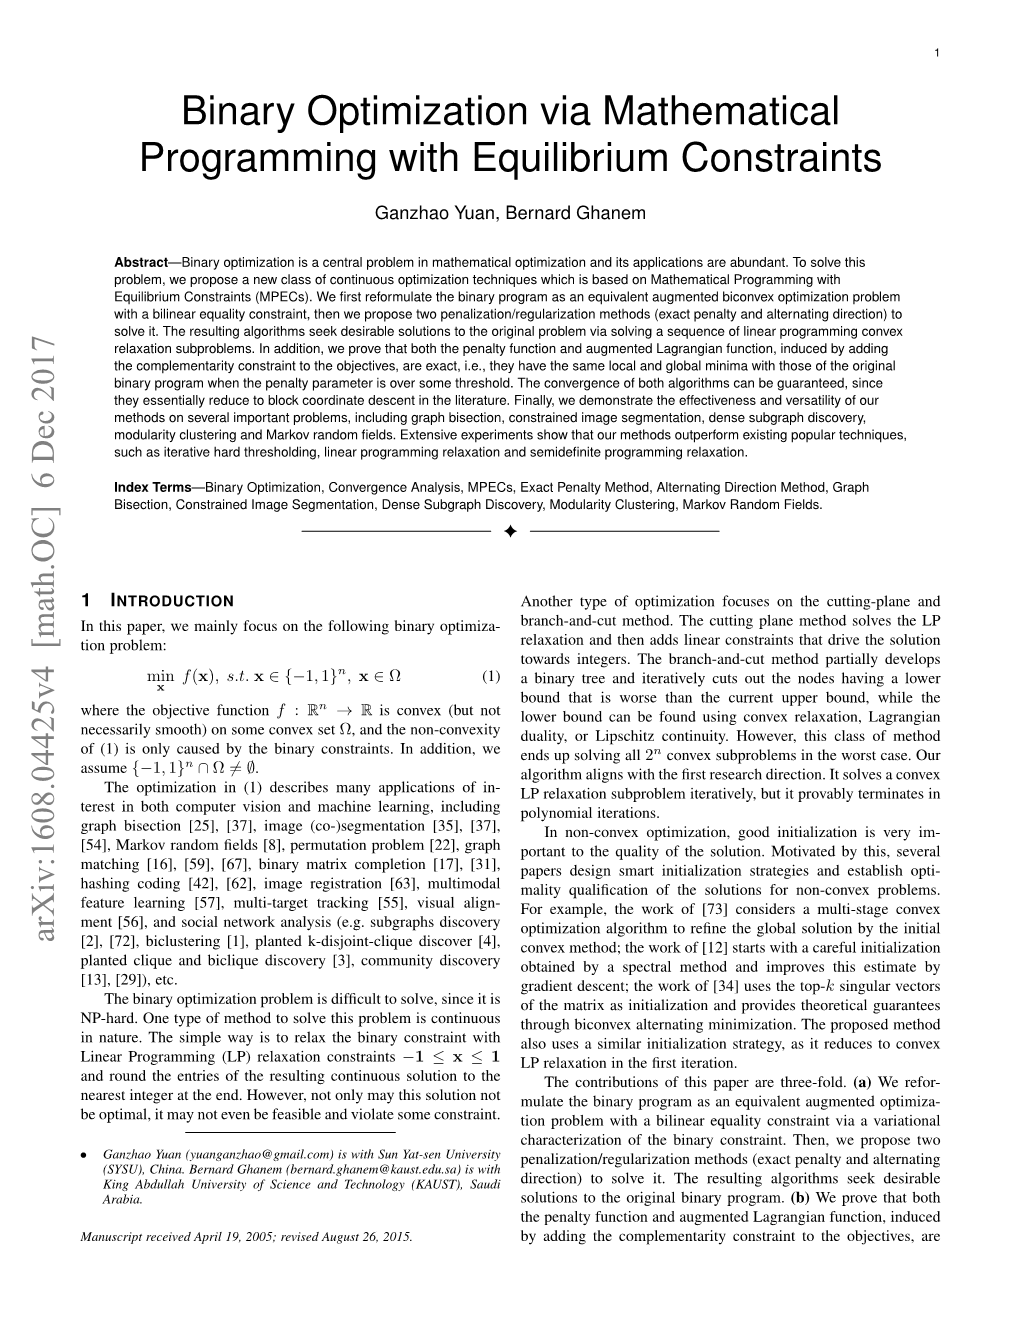 Binary Optimization Via Mathematical Programming with Equilibrium Constraints